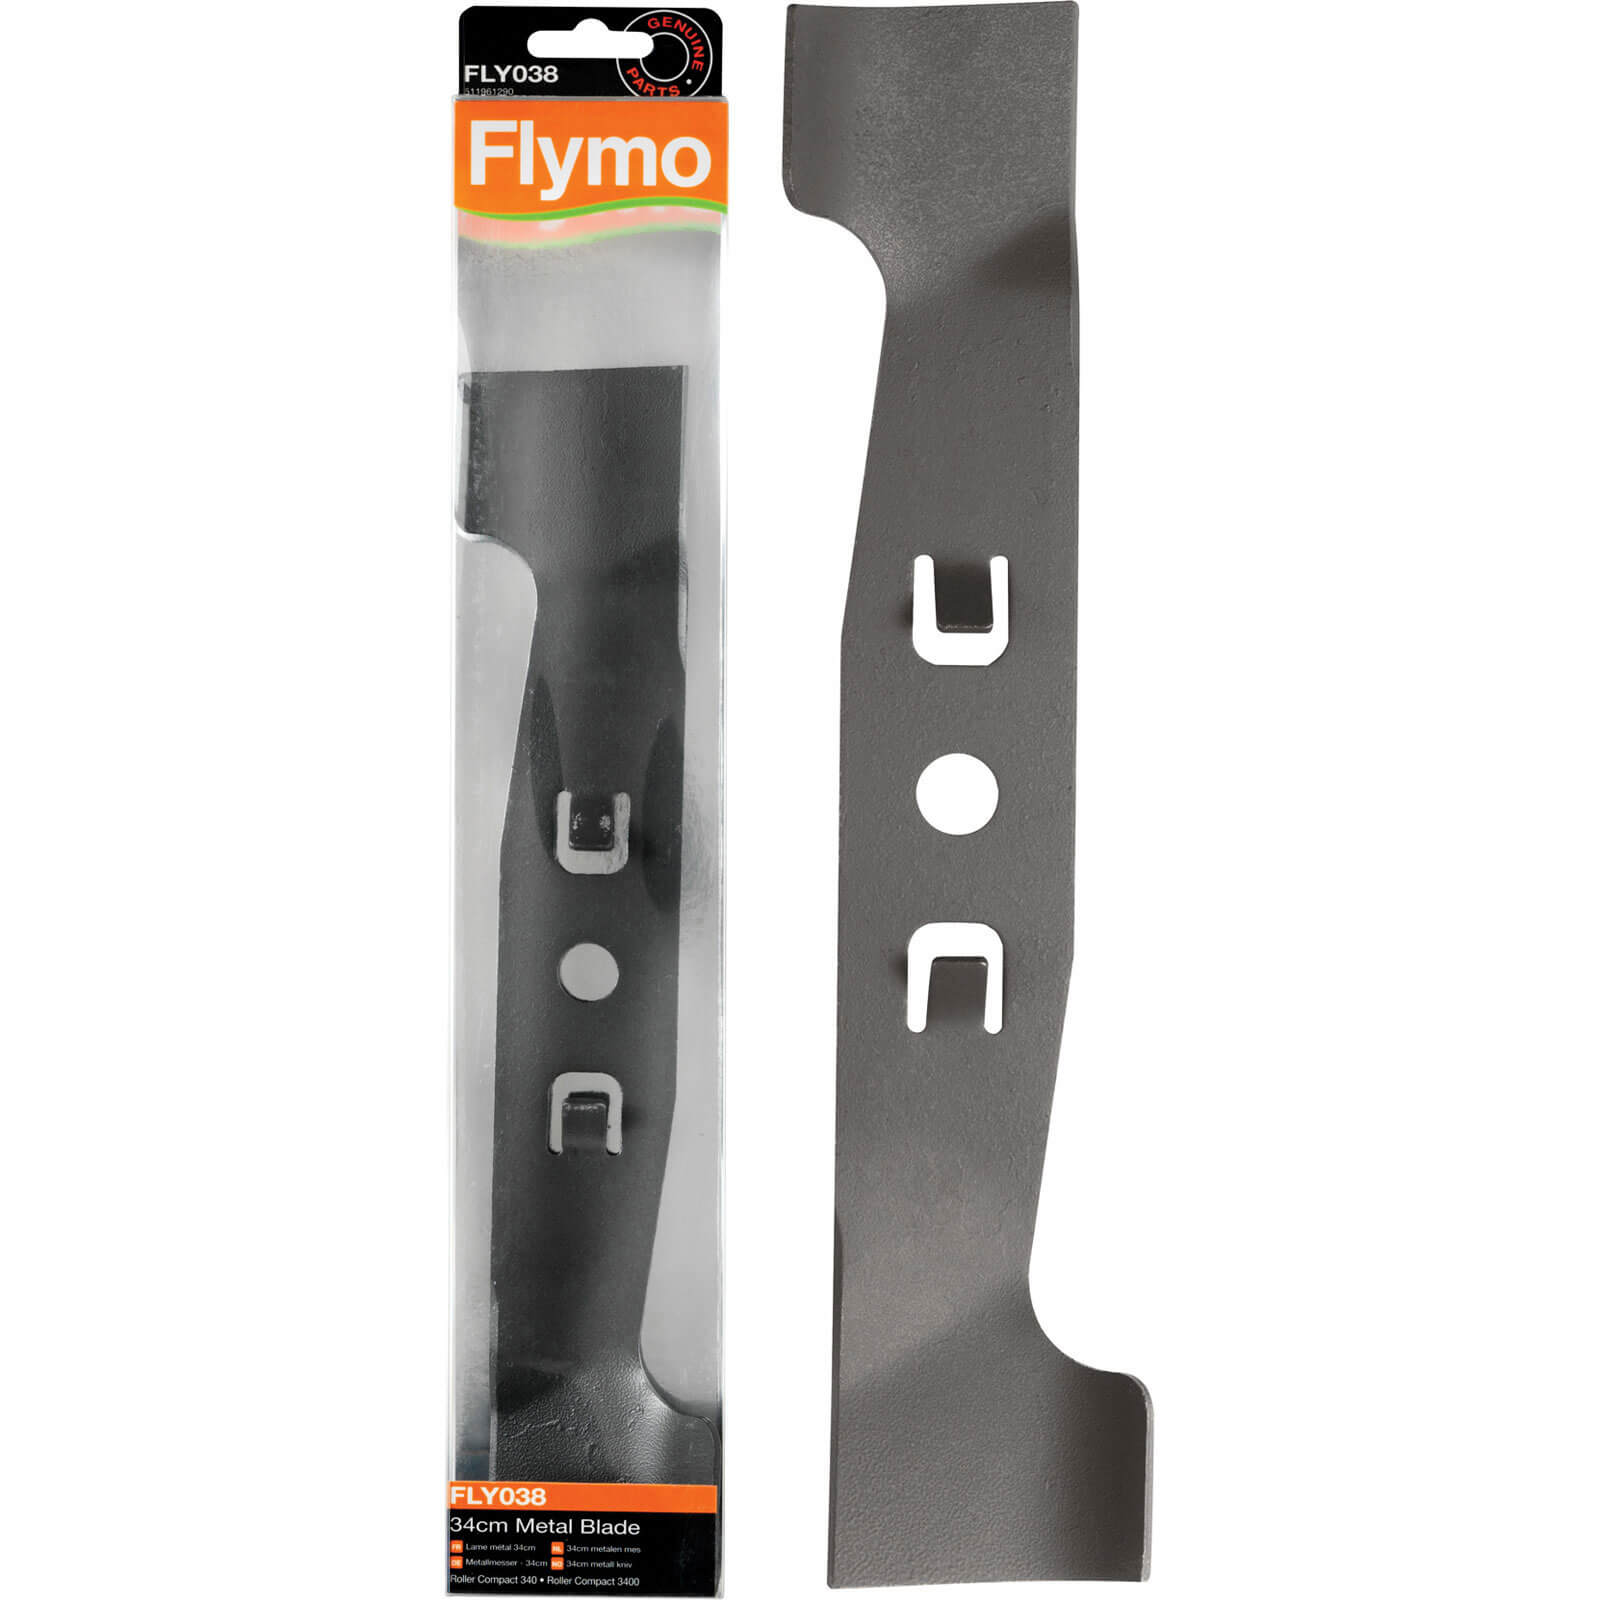 Flymo FLY038 Genuine Blade for Roller Compact 340 Lawnmowers 340mm Pack of 1